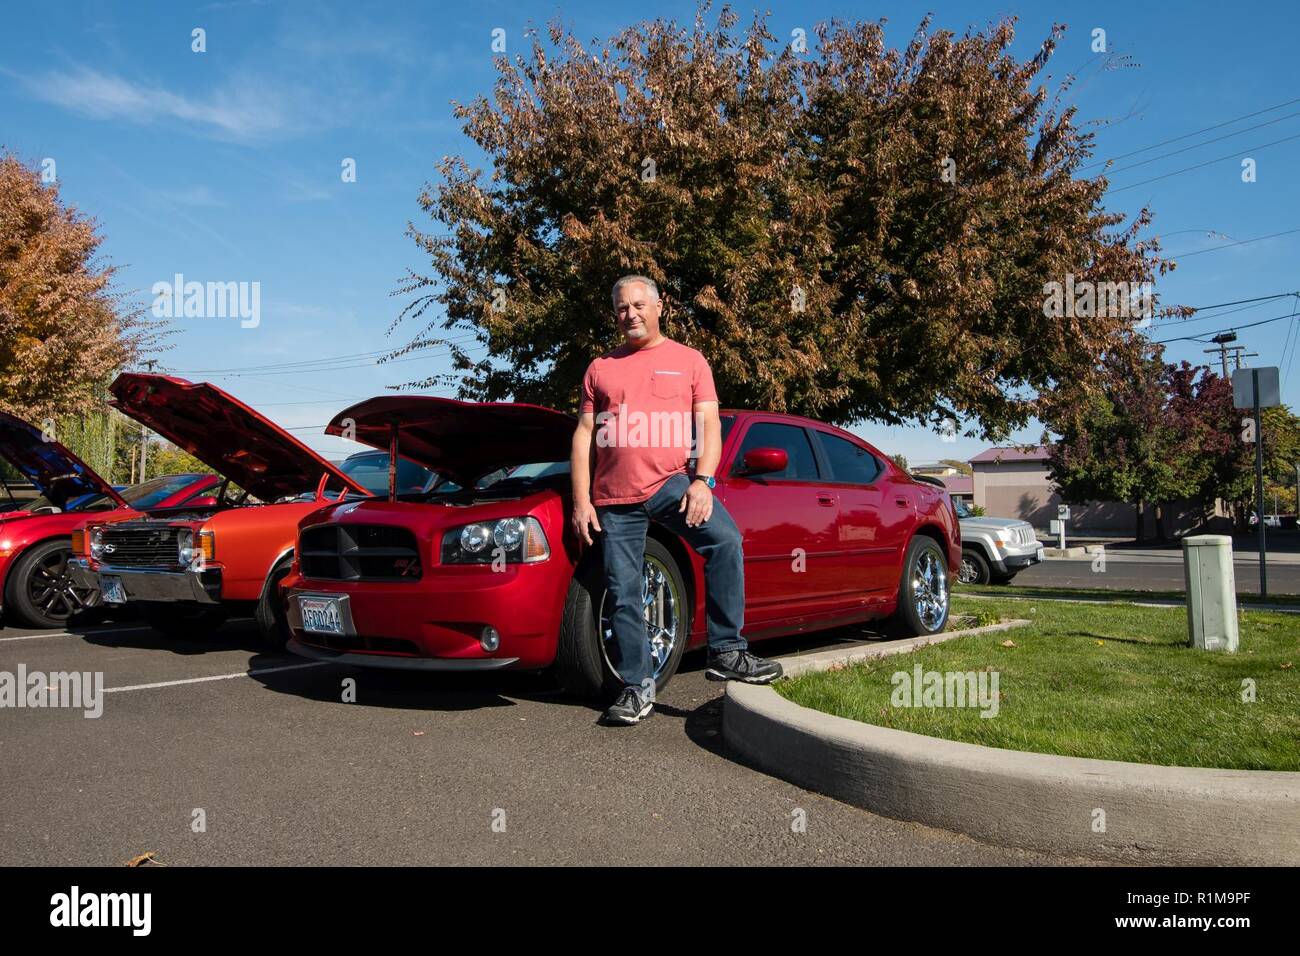 Michael (Mike) Deccio, an engineering technician, stands with his Inferno Red 2006 Dodge, Charger that was one of the first in the assembly line. Mike is one of the 15 U.S. Army Corps of Engineers Walla Walla District employees who participated in the “Wheels to Work” day, on October 19, 2018, in Walla Walla, Washington. Stock Photo